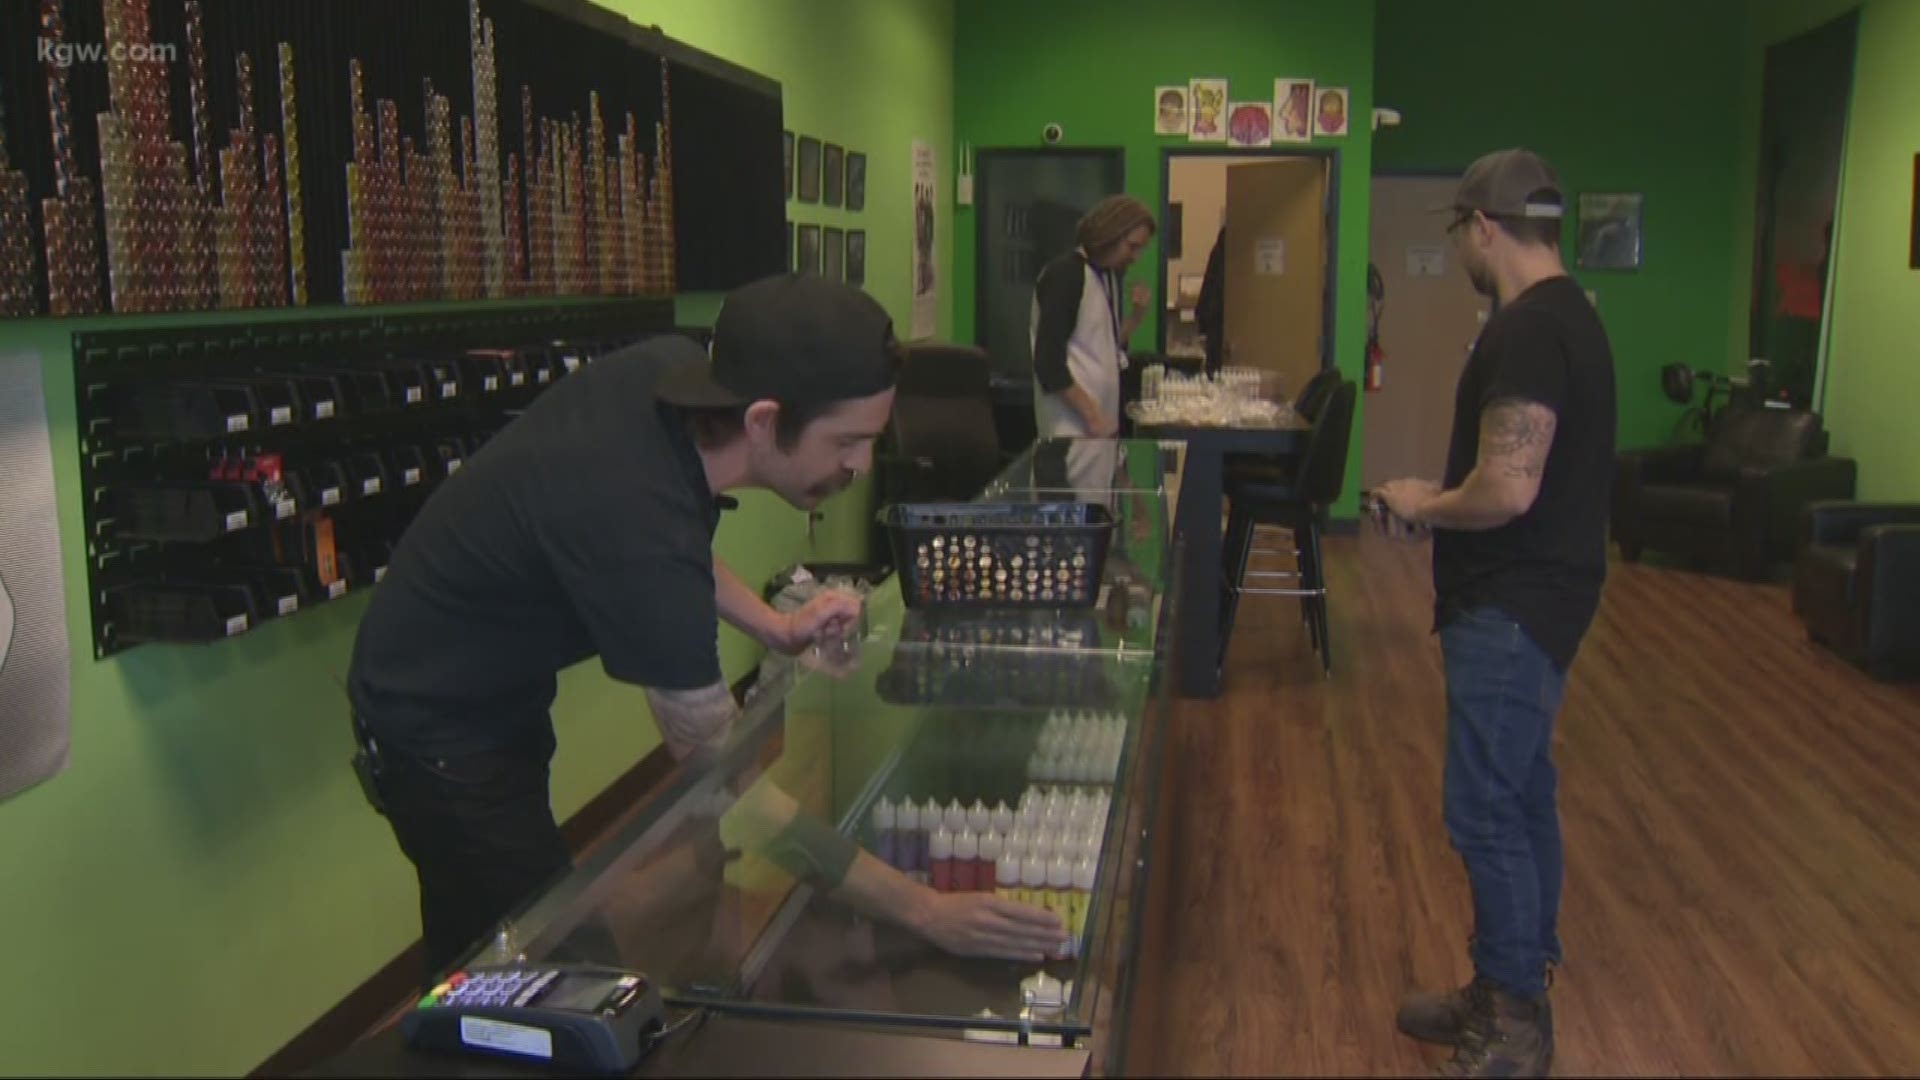 It's been a rollercoster week for Oregon's vape industry. After just two day of a temporary ban on flavored vaping products, appeals court halts the ban.